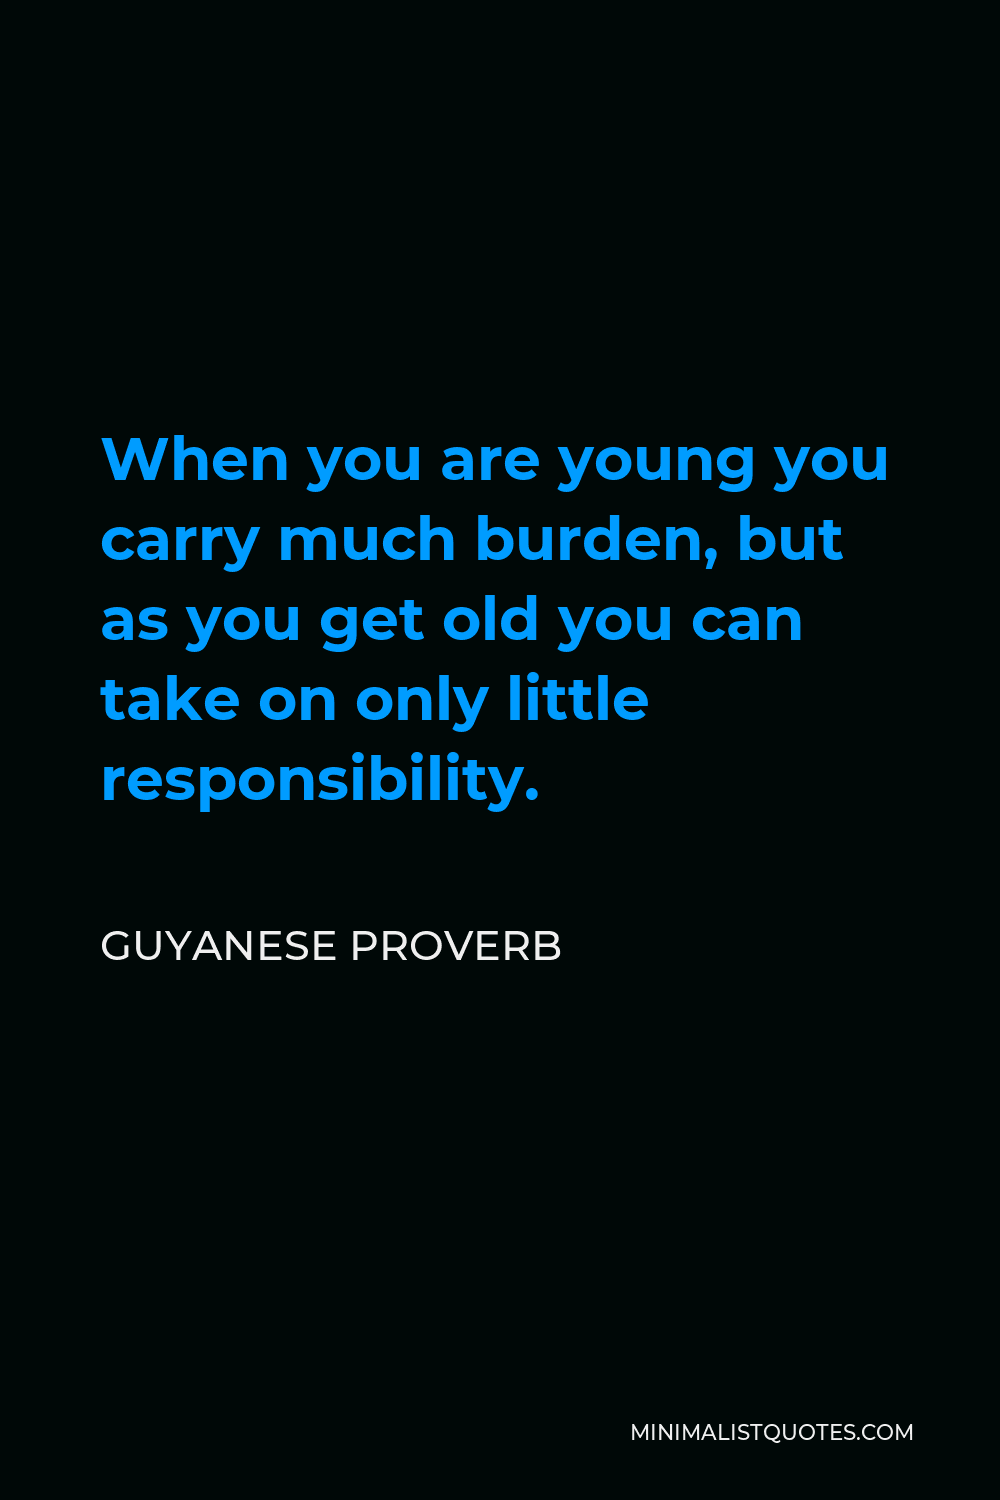 Guyanese Proverb Quote - When you are young you carry much burden, but as you get old you can take on only little responsibility.